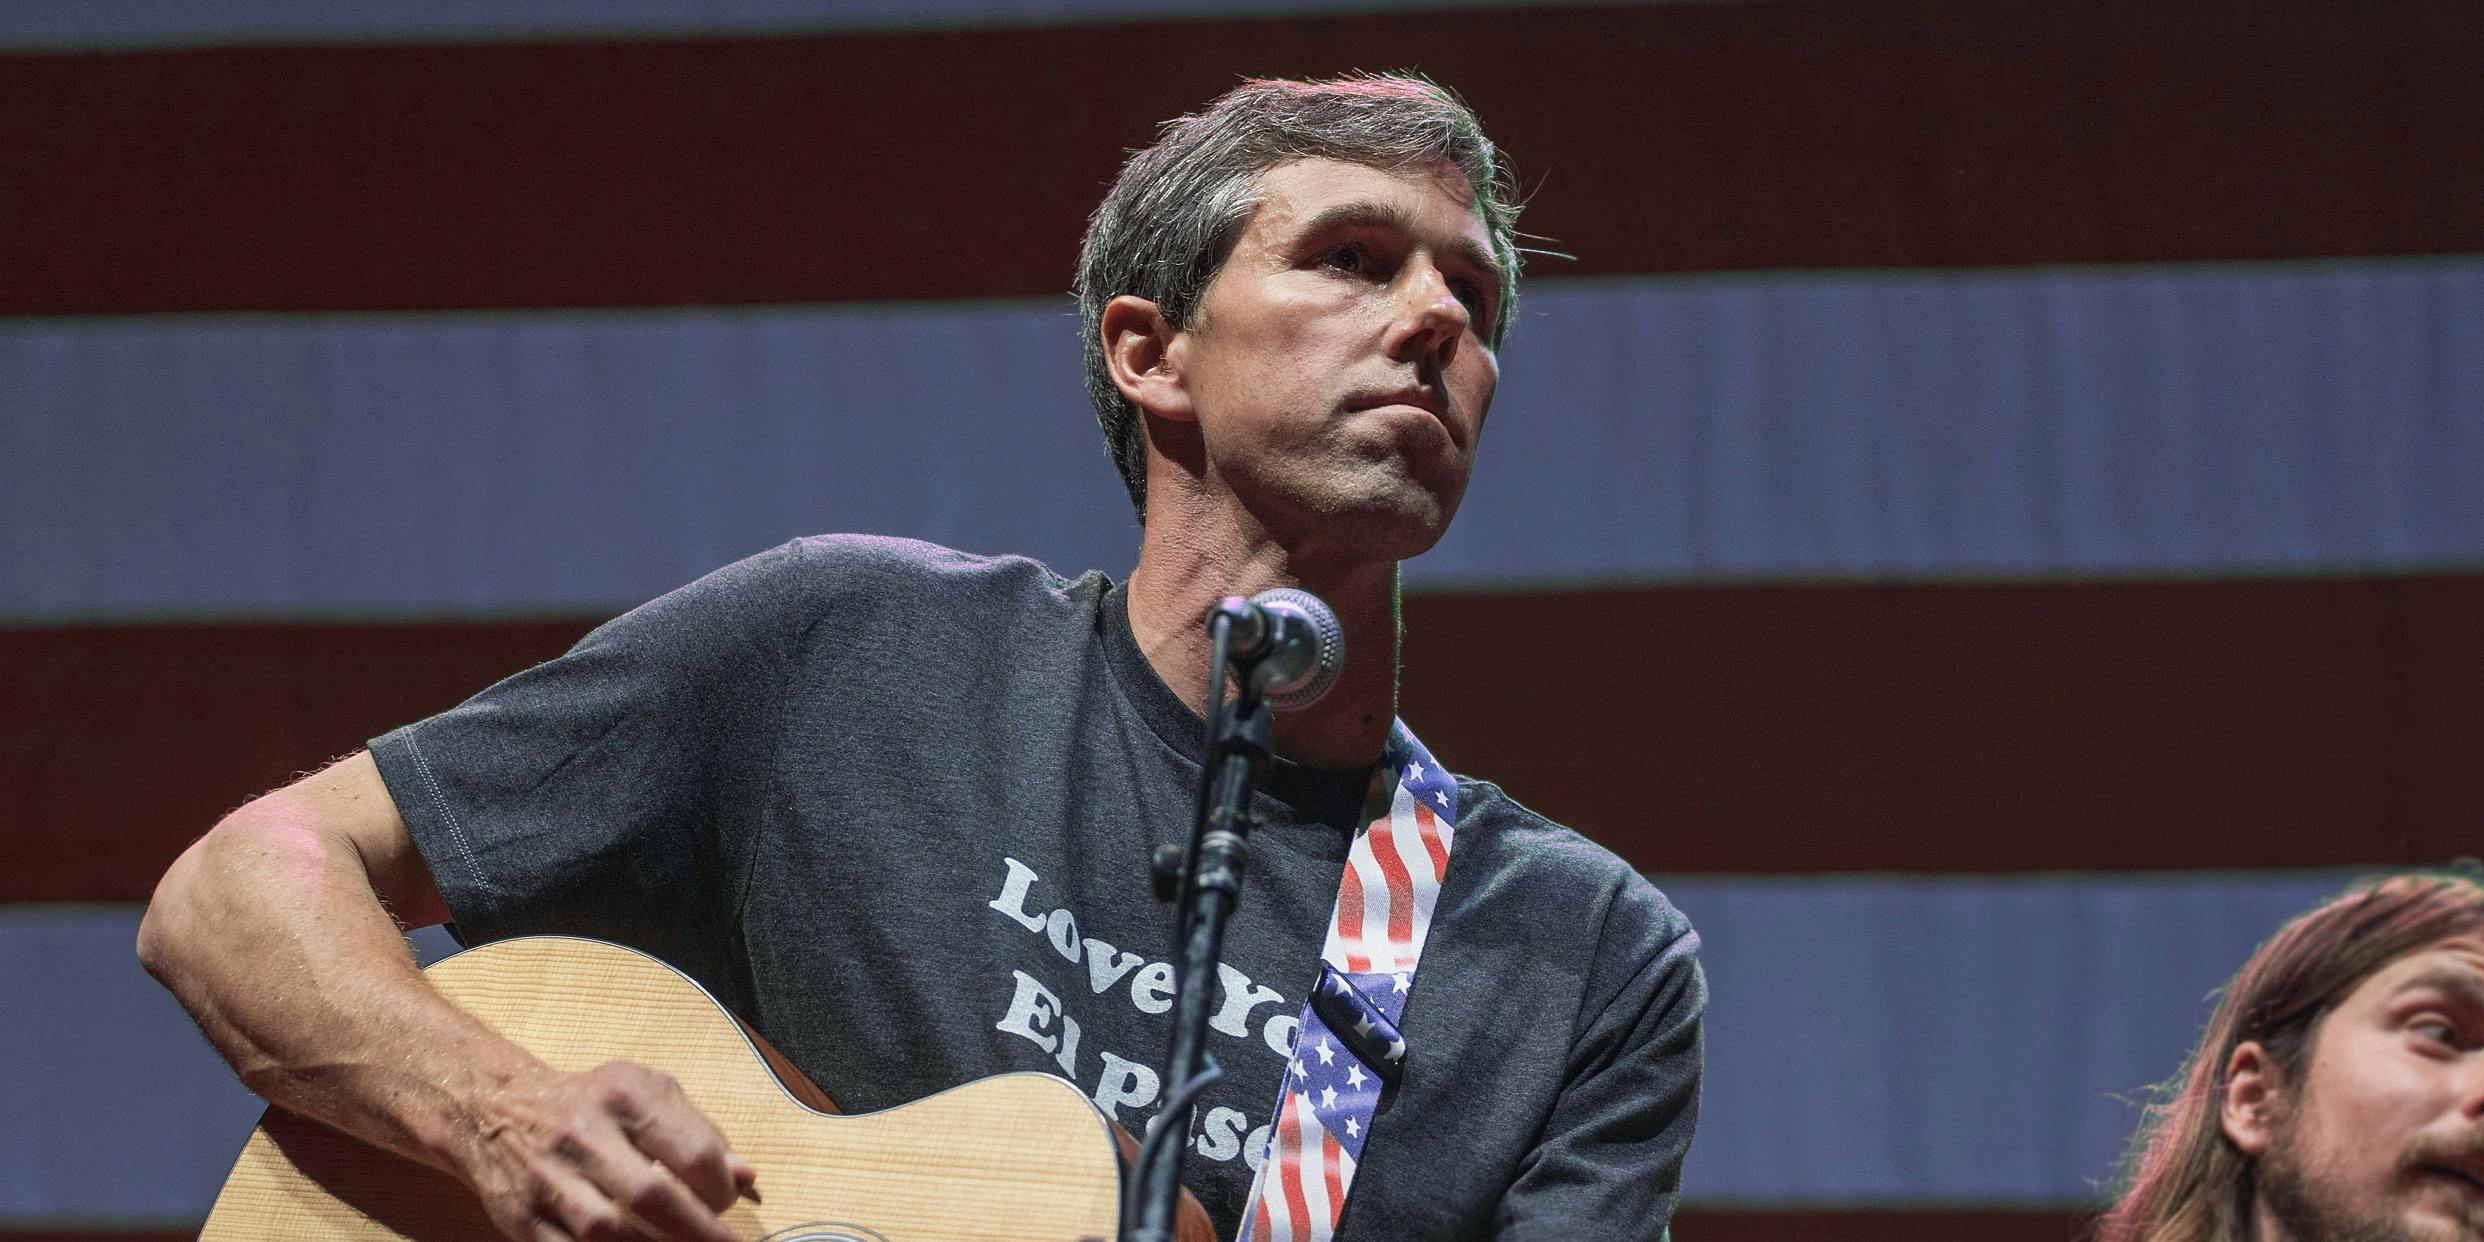 AUSTIN, TX - JULY 04: Beto O'Rourke (L) and Lukas Nelson perform onstage with Willie Nelson and Family during the 45th Annual Willie Nelson 4th of July Picnic at Austin360 Amphitheater on July 4, 2018 in Austin, Texas. (Photo by Rick Kern/WireImage via Getty Images)